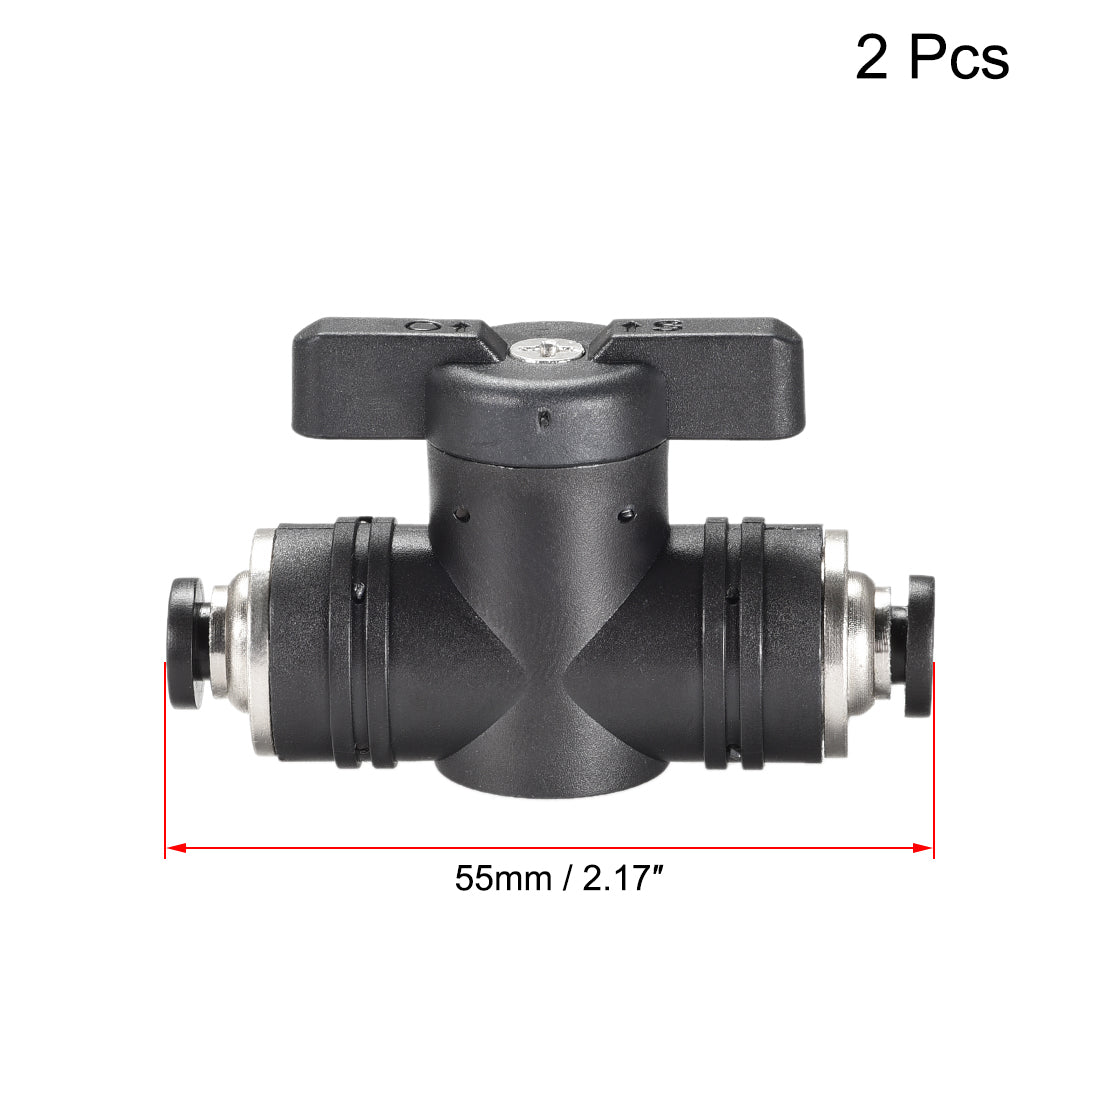 uxcell Uxcell Pneumatic Ball Valve, Push to Connect, 4mm Inner Diameter, for Air Flow Control, Plastic Zinc Alloy Black 2Pcs